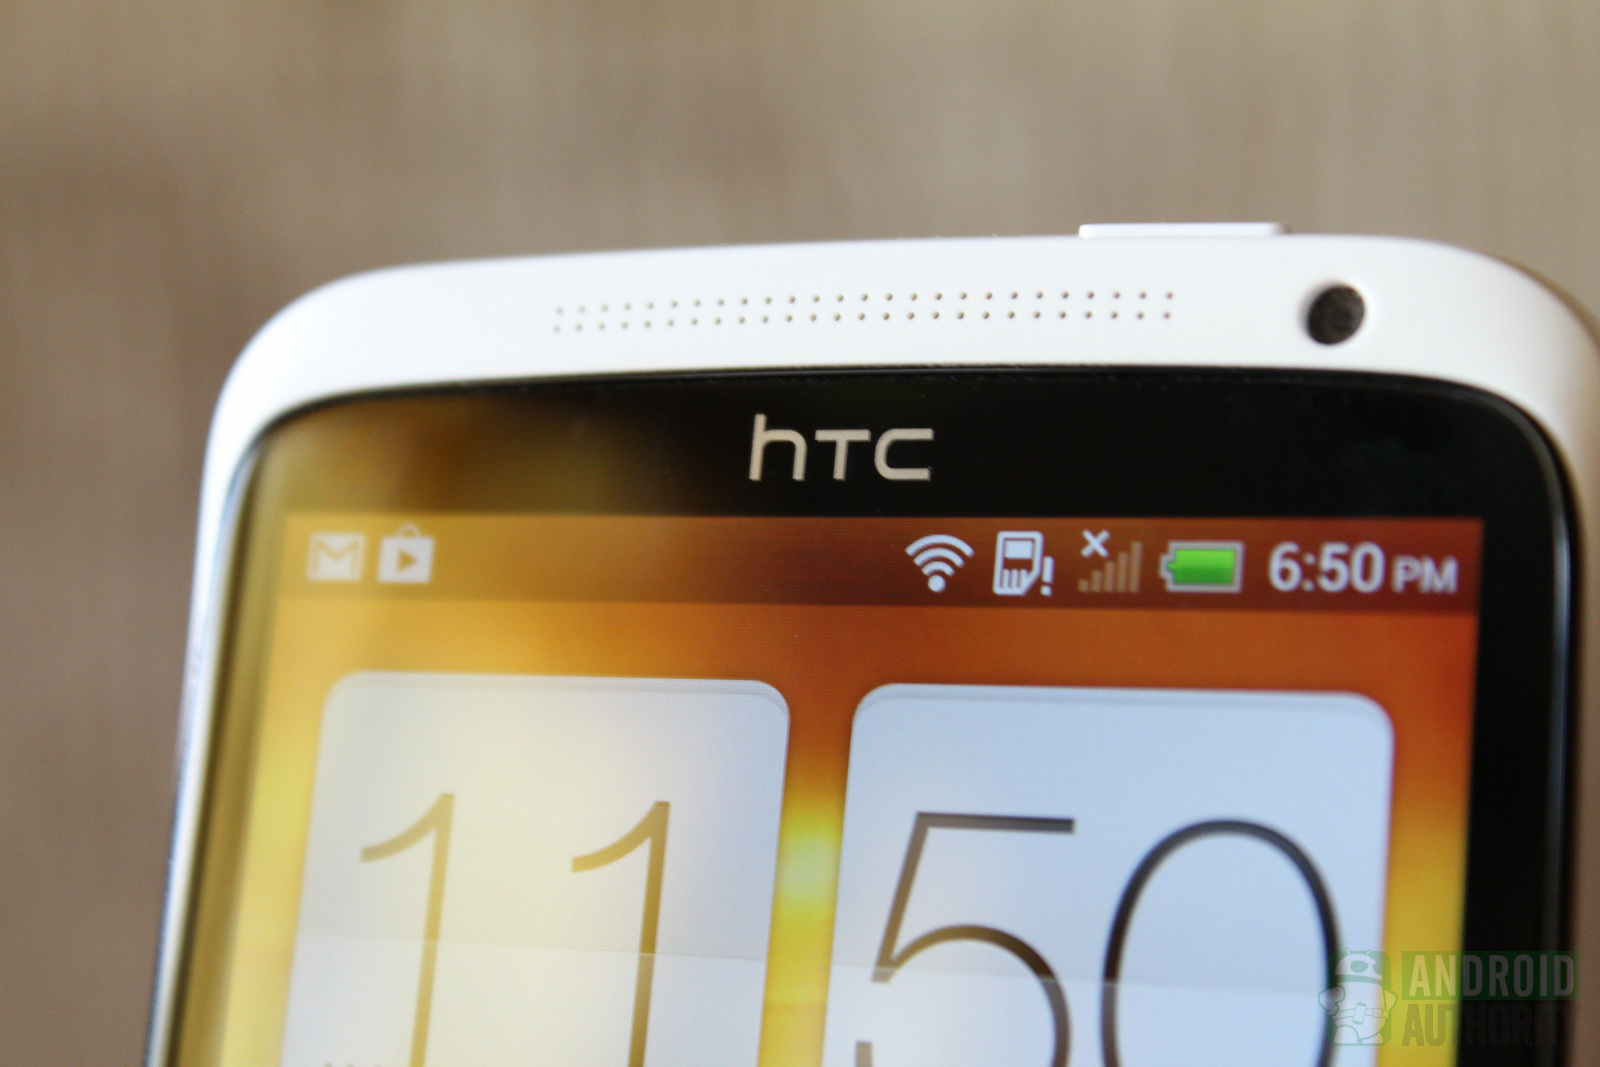 Screen of an HTCphone showing the HTClogo